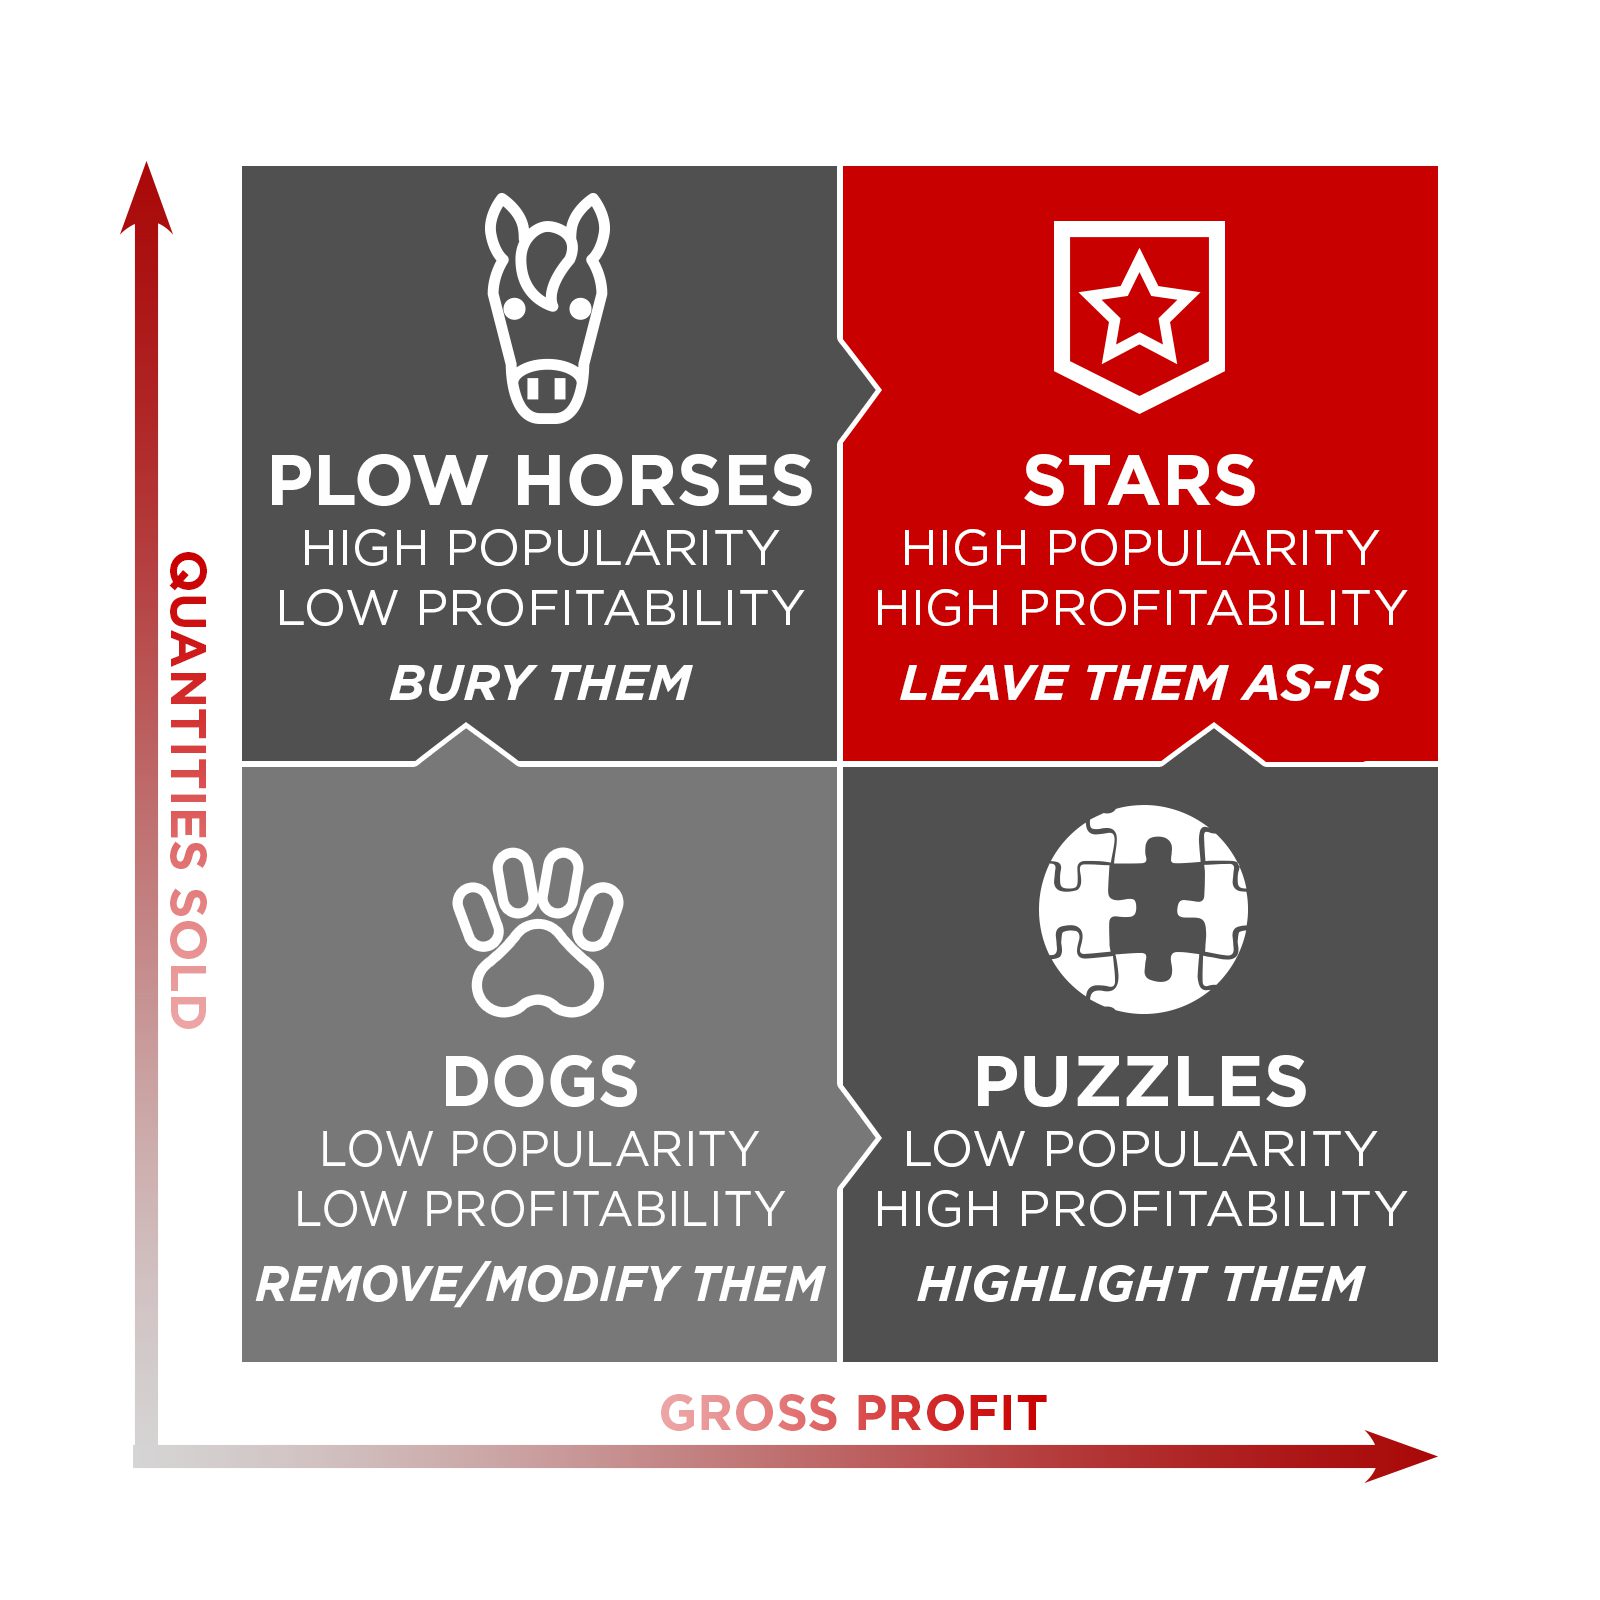 Menu item categorization: plow horses, dogs, stars and puzzles